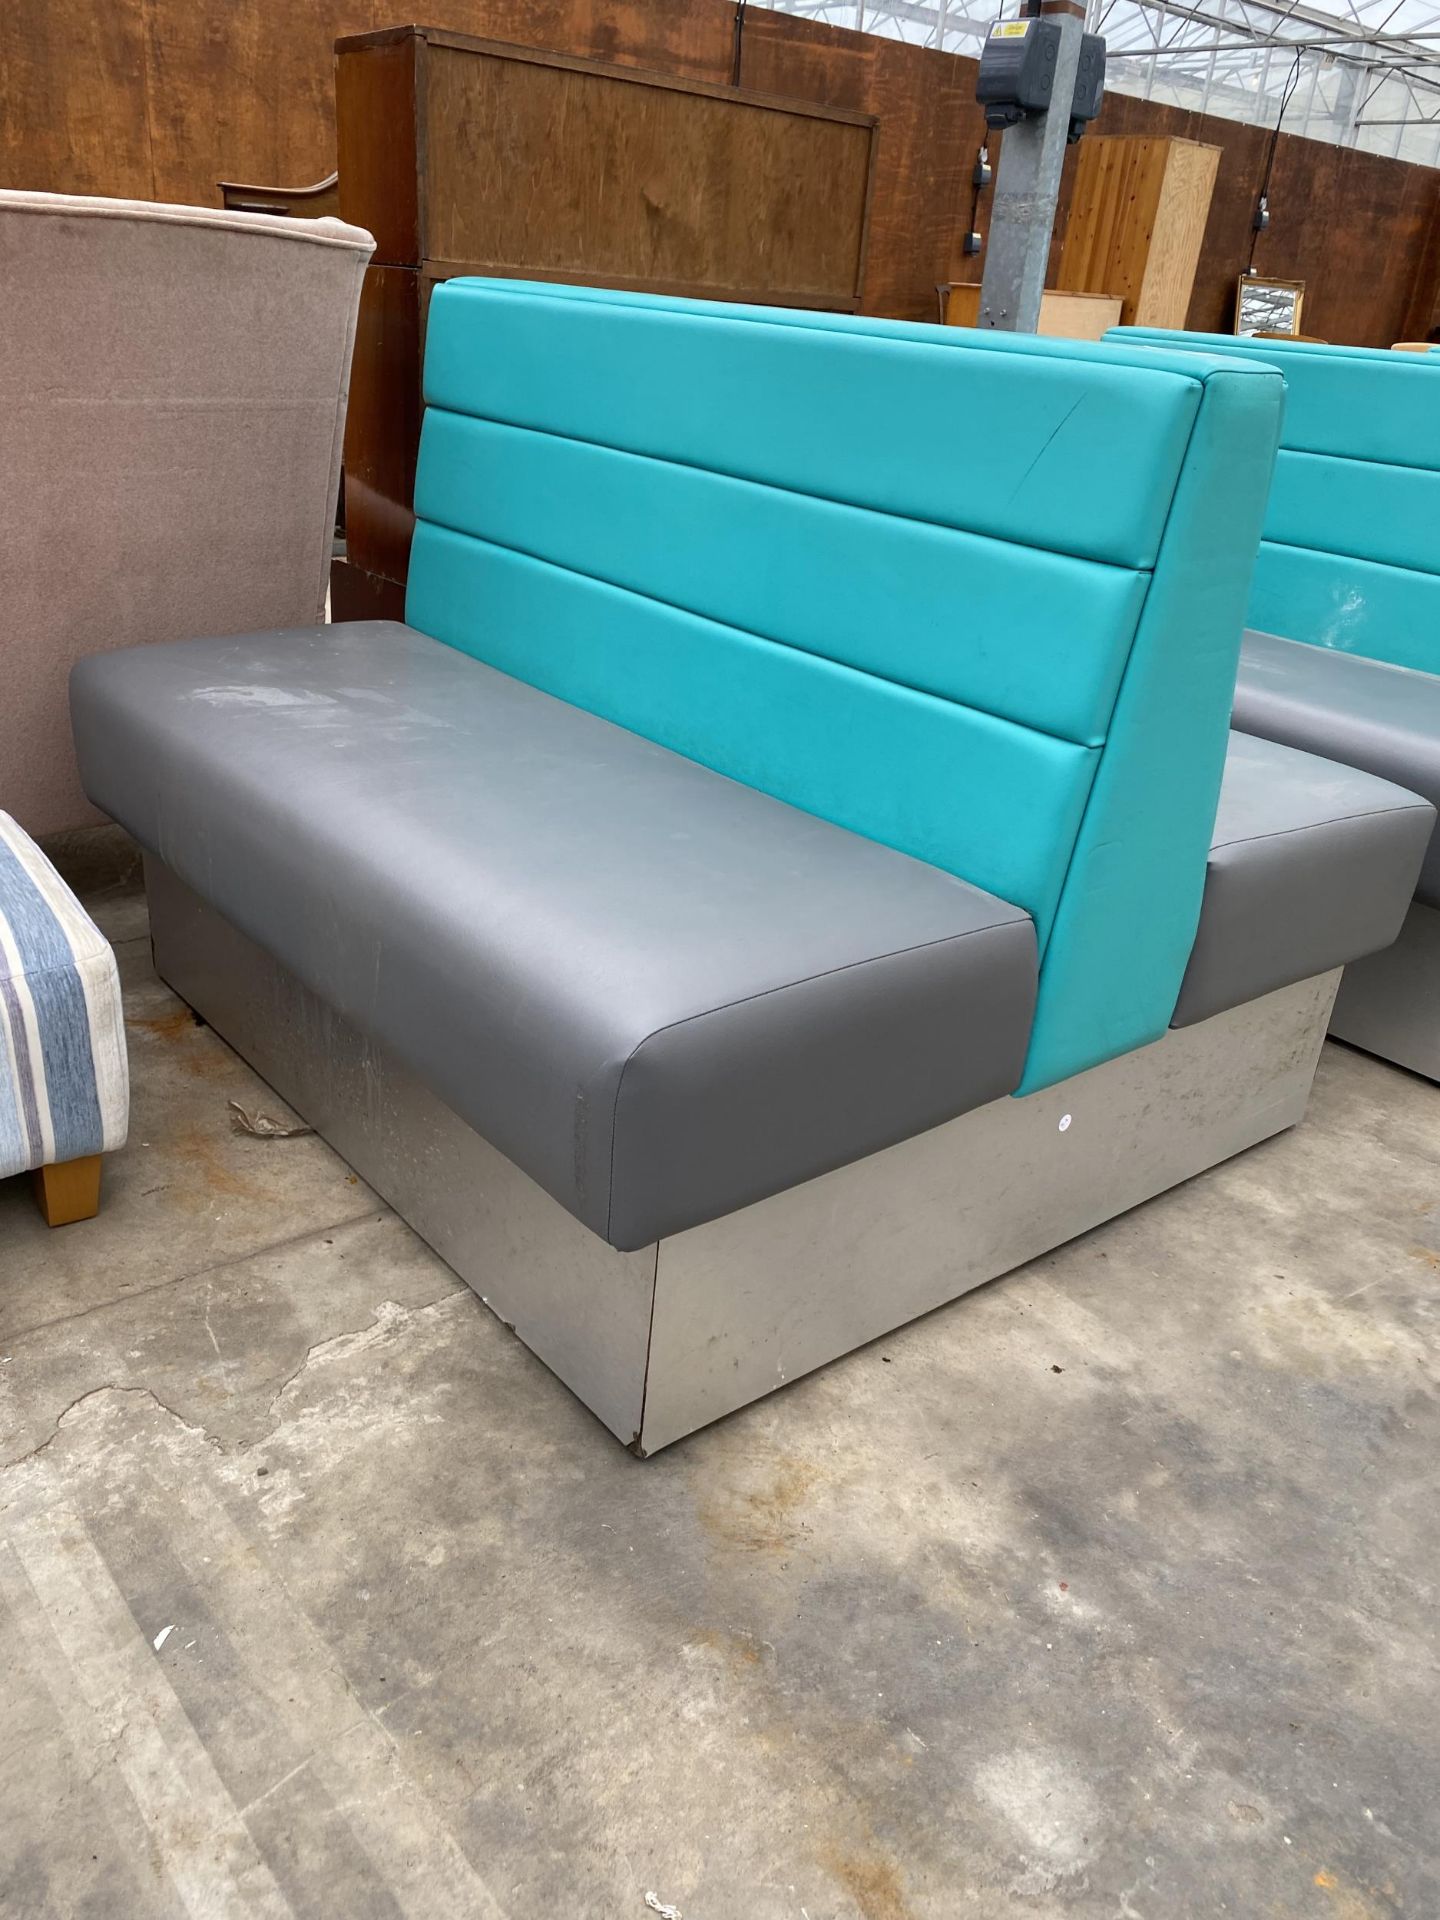 A MODERN DOUBLE SIDED BOOTH SEATING IN TURQUOISE AND GREY - Image 2 of 3